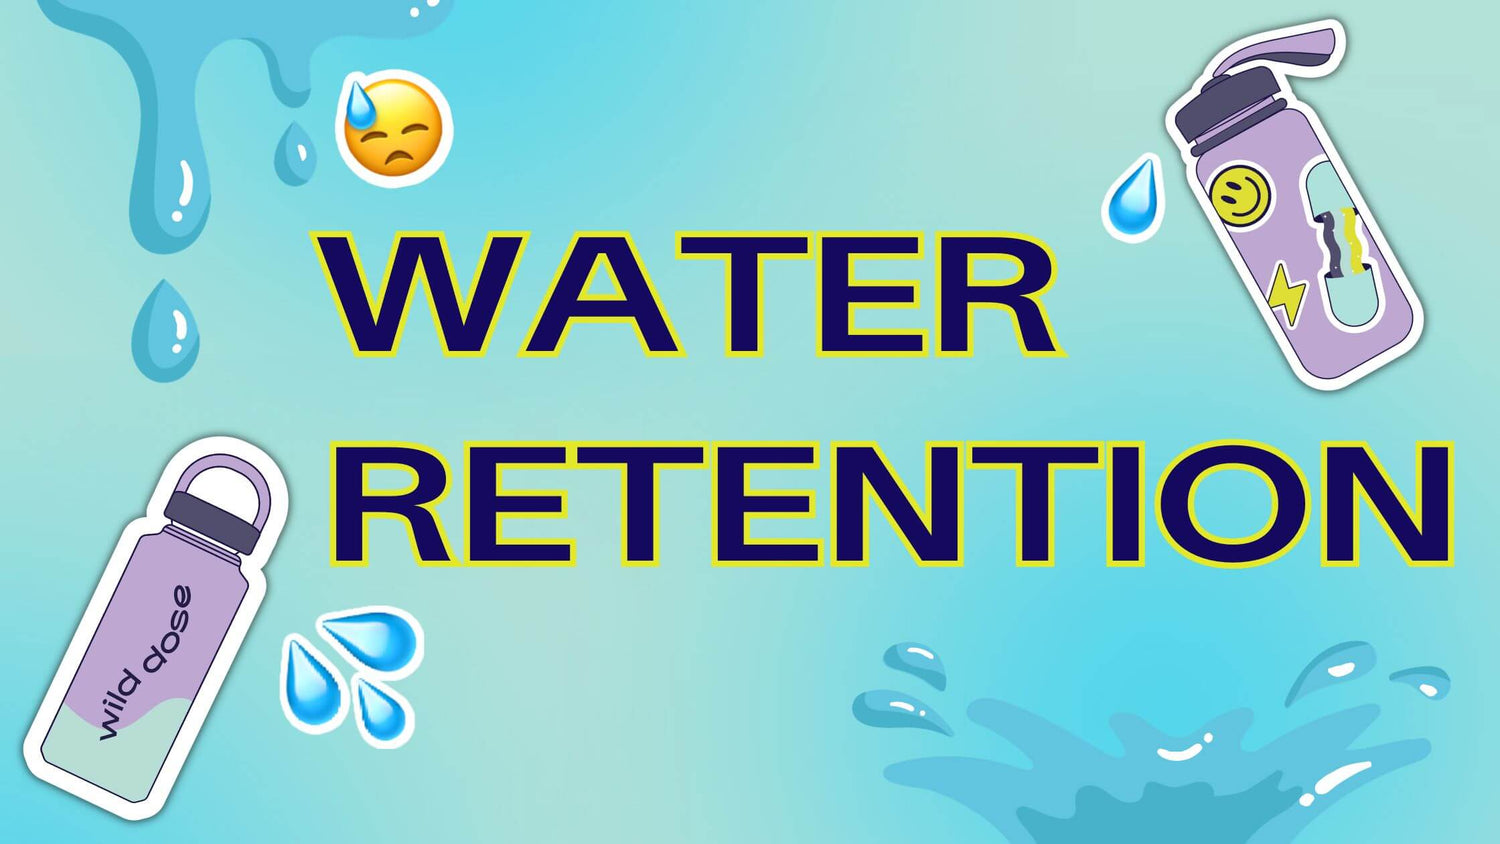 What Is Water Retention?